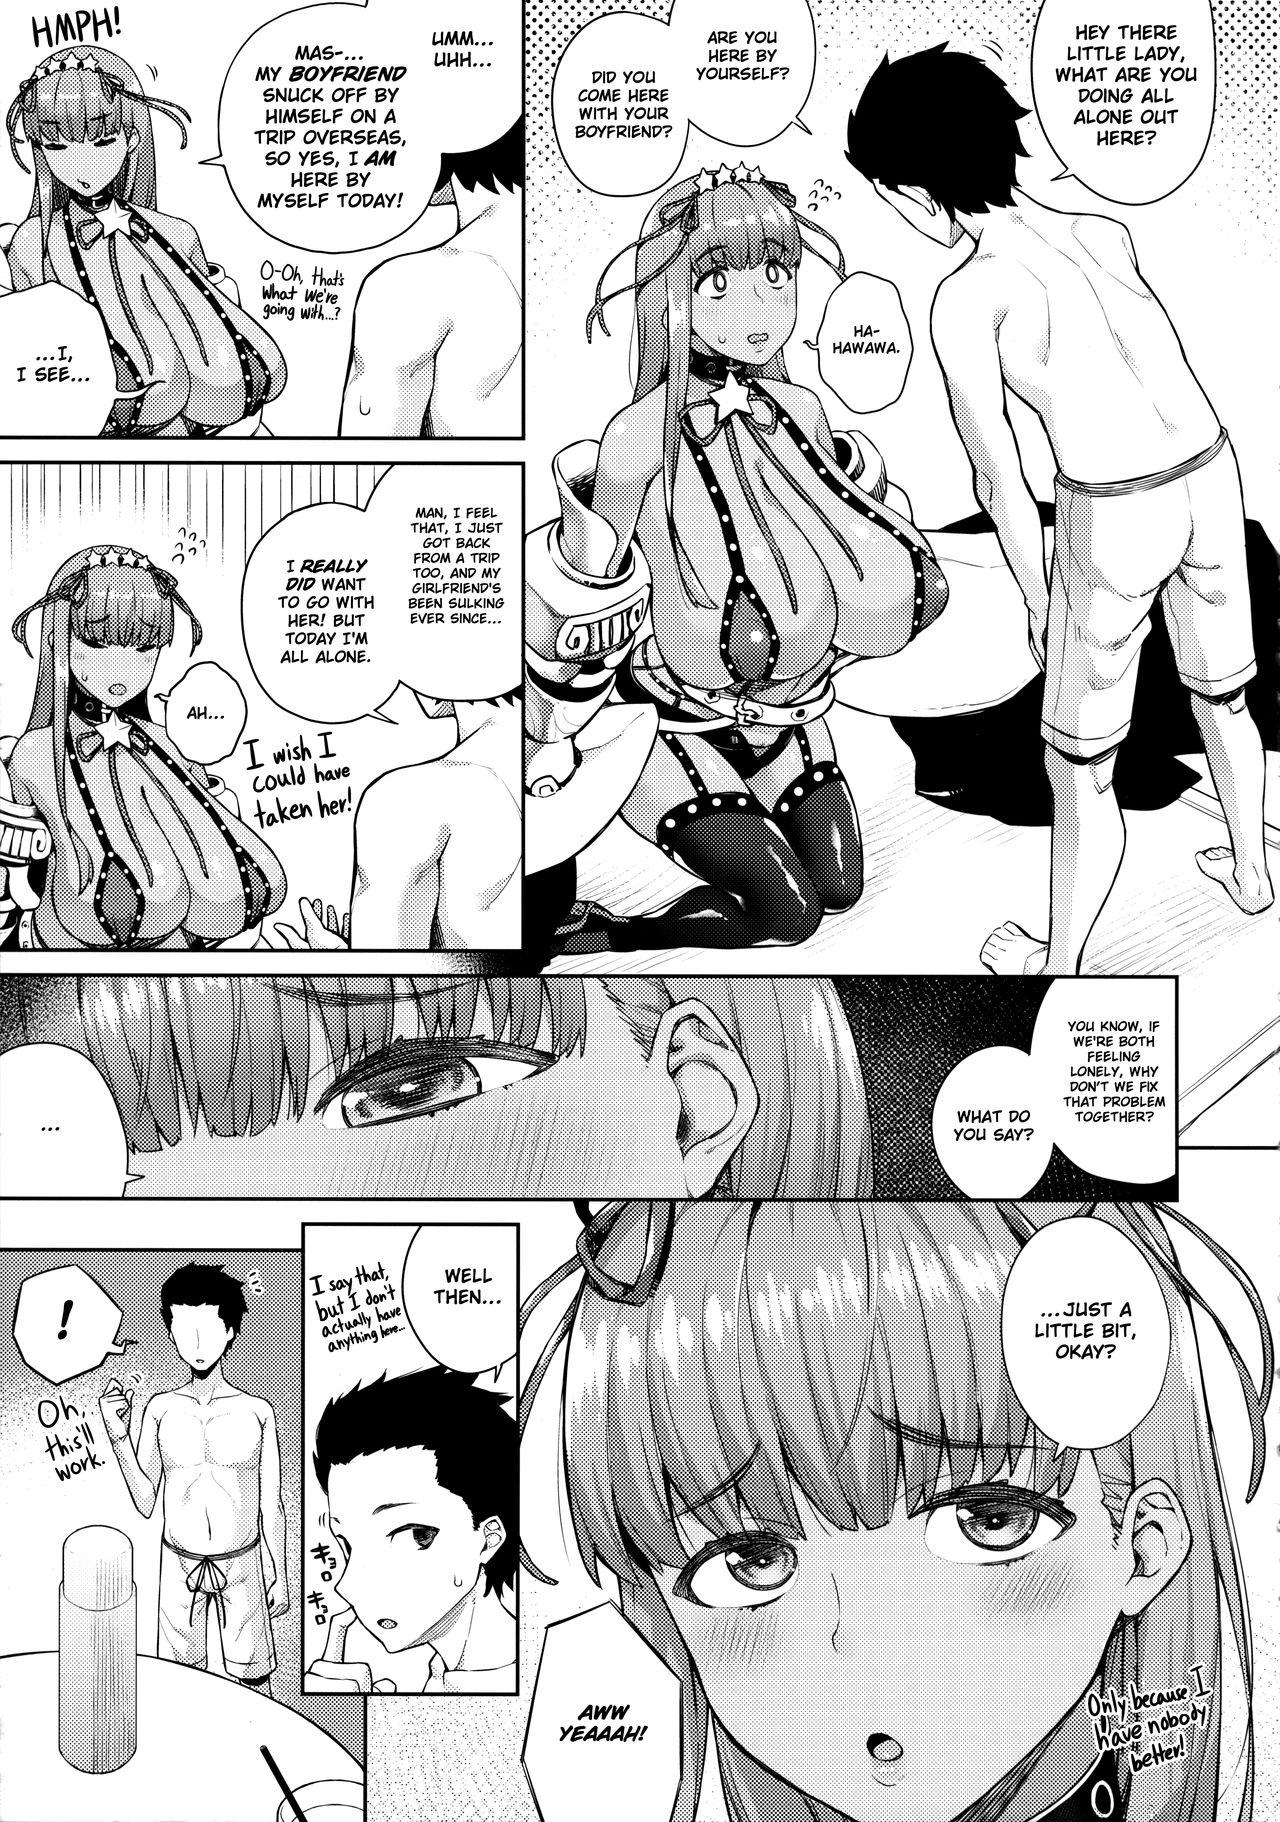 Speculum Kyokou no Umibe nite | at the fictional seaside - Fate grand order She - Page 5